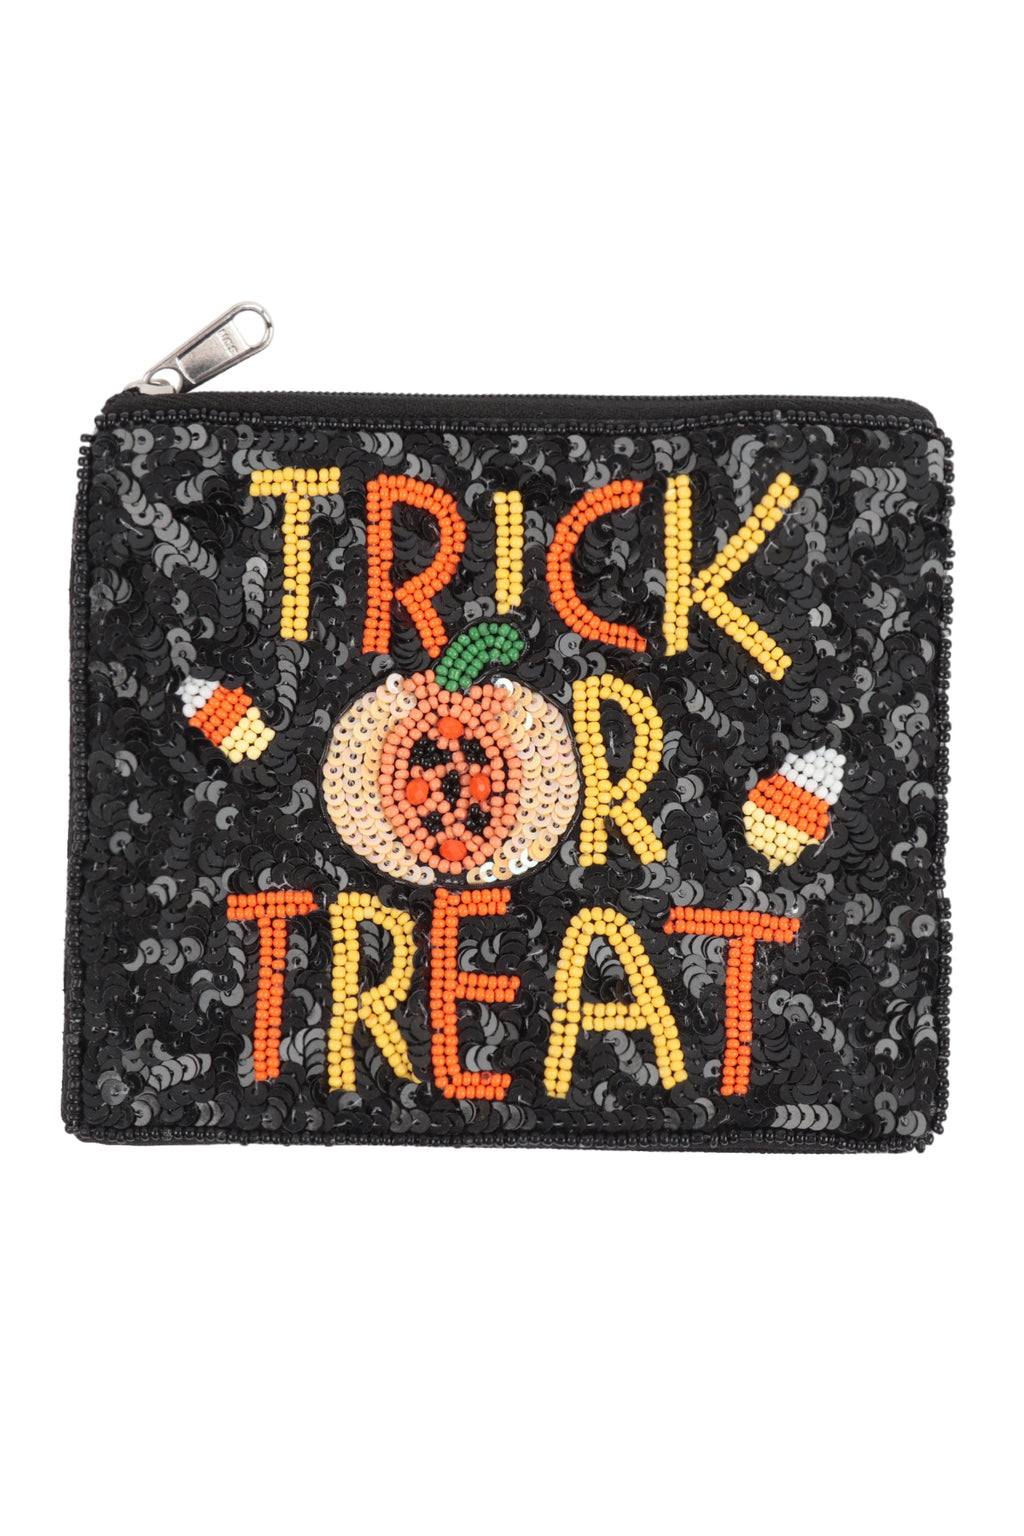 Trick or Treat Halloween Sequin Coin Pouch Black - Pack of 6